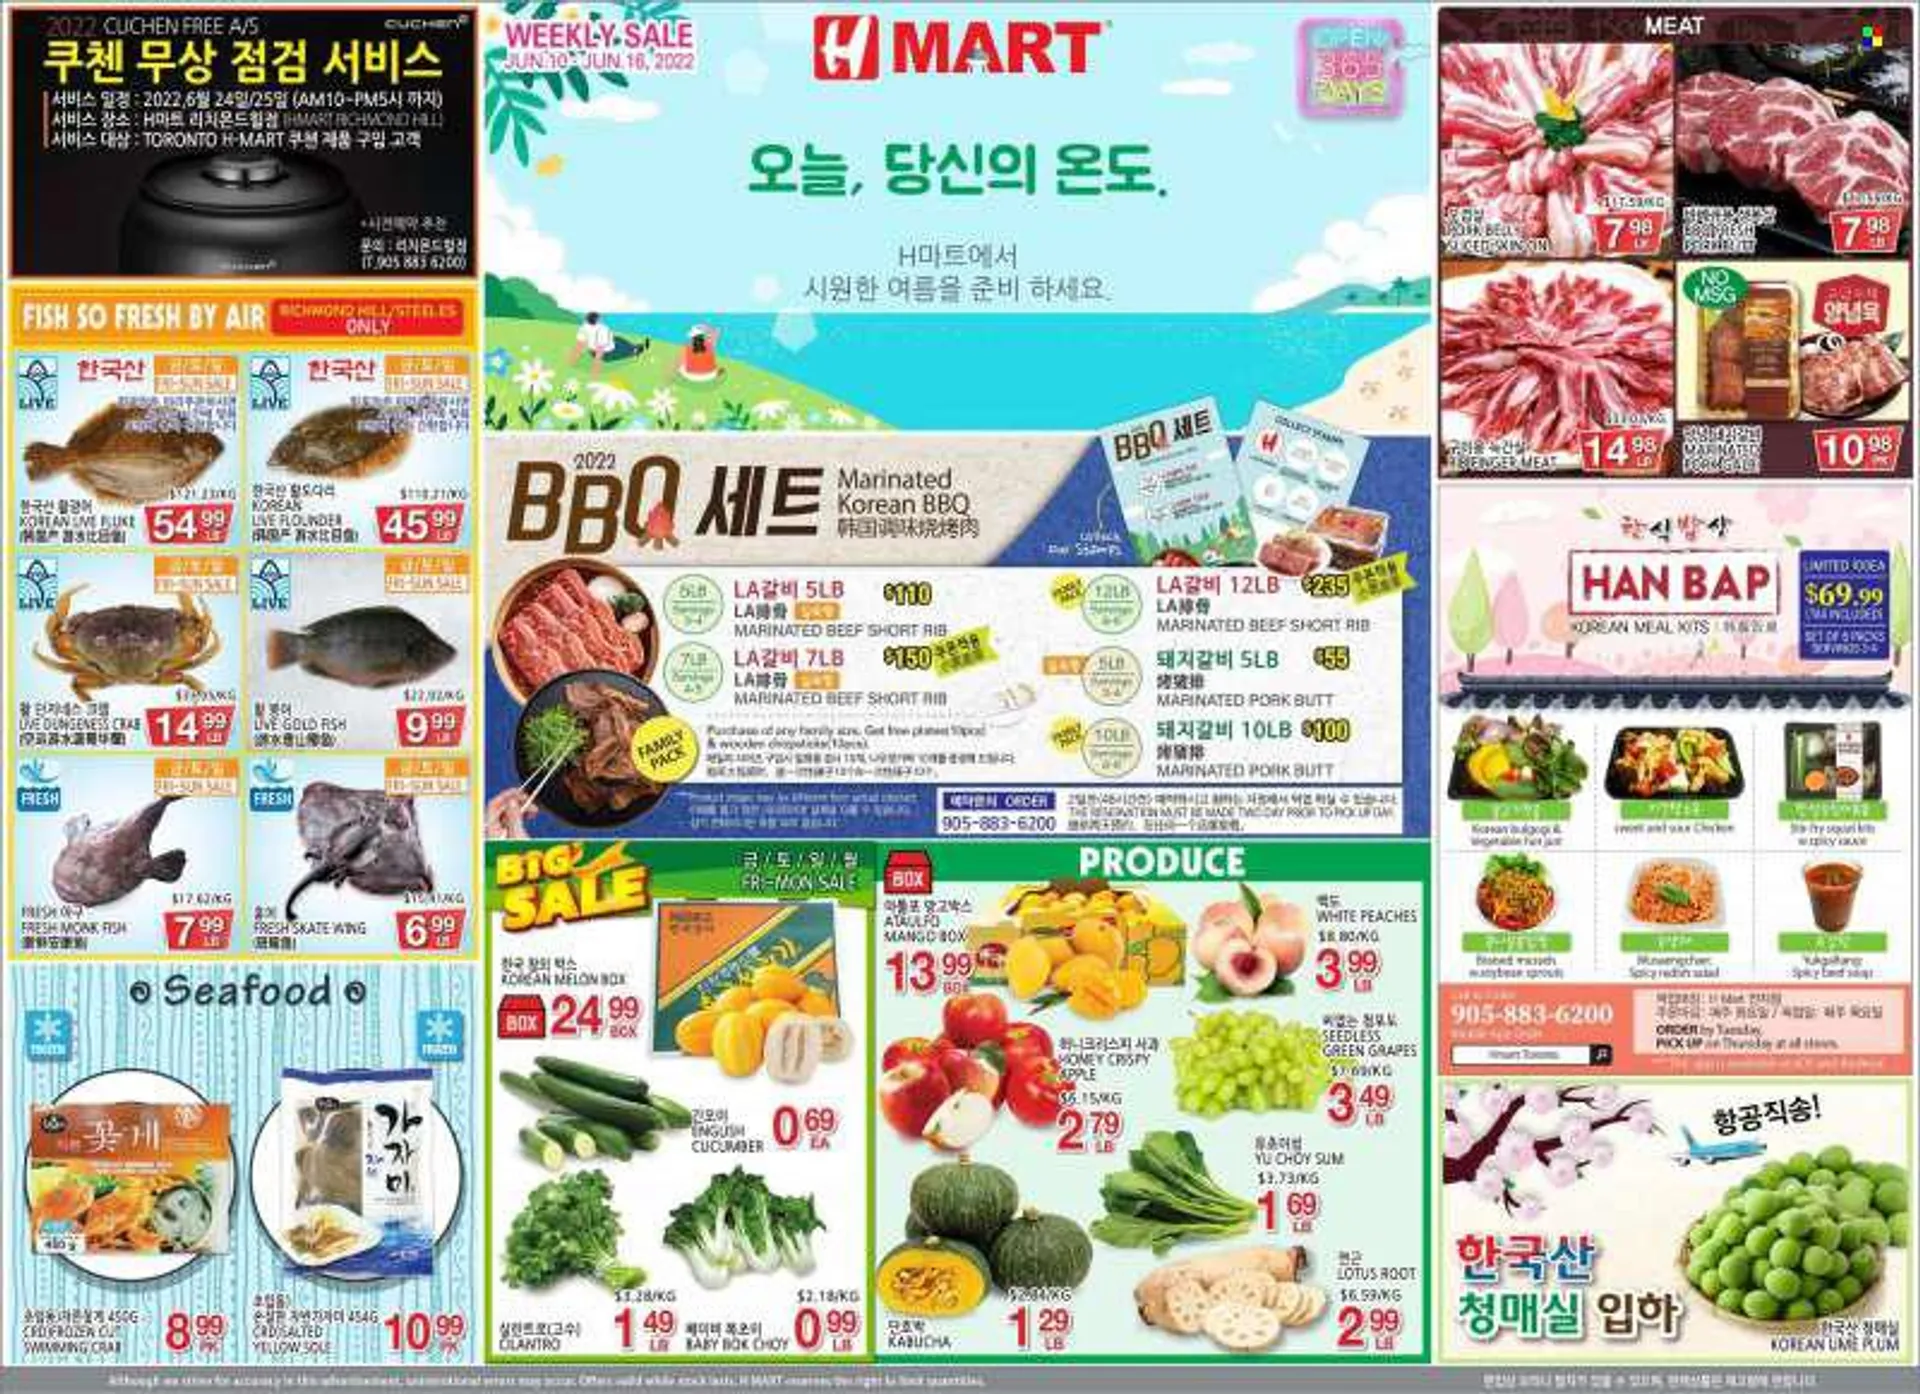 H Mart Flyer - June 10, 2022 - June 16, 2022 - Sales products - radishes, salad, grapes, mango, melons, peaches, flounder, monkfish, mussel, squid, crab, fish, soup, sauce, cilantro, honey, gin, marinated beef, pork belly, pork meat, marinated pork, Lotus